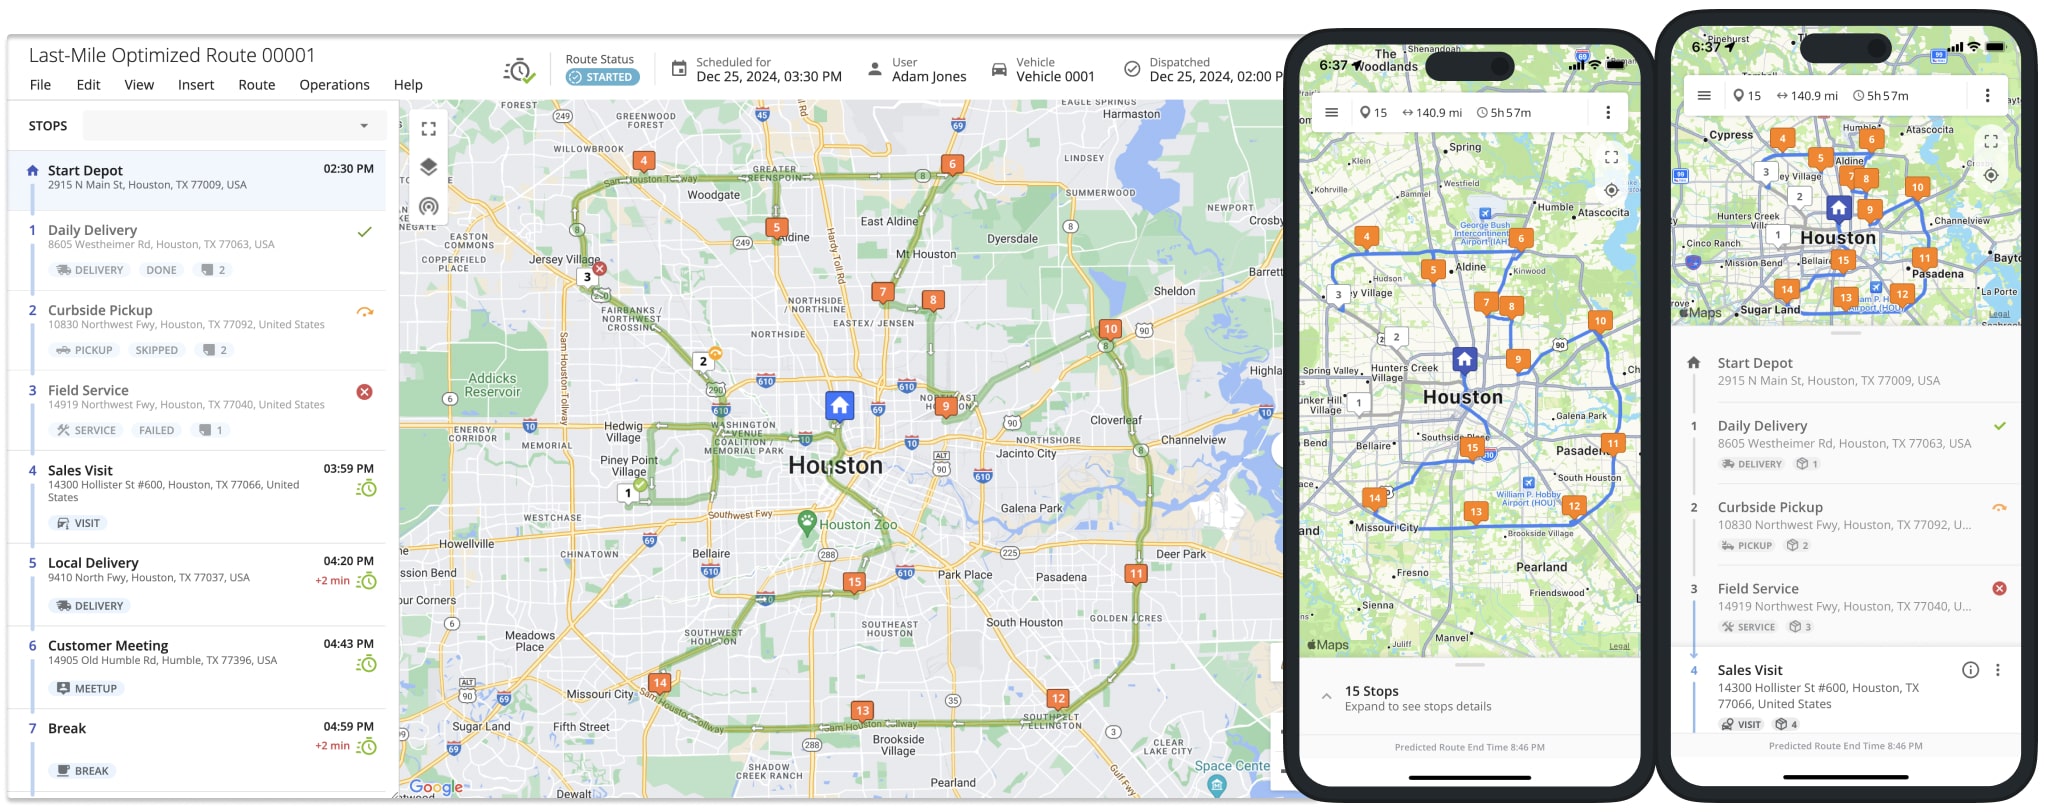 Web Route Editor and Mobile Driver Apps real-time route synchronization for inserted and removed stops, route and stop statuses, attached proof of visit and delivery, and other route updates.